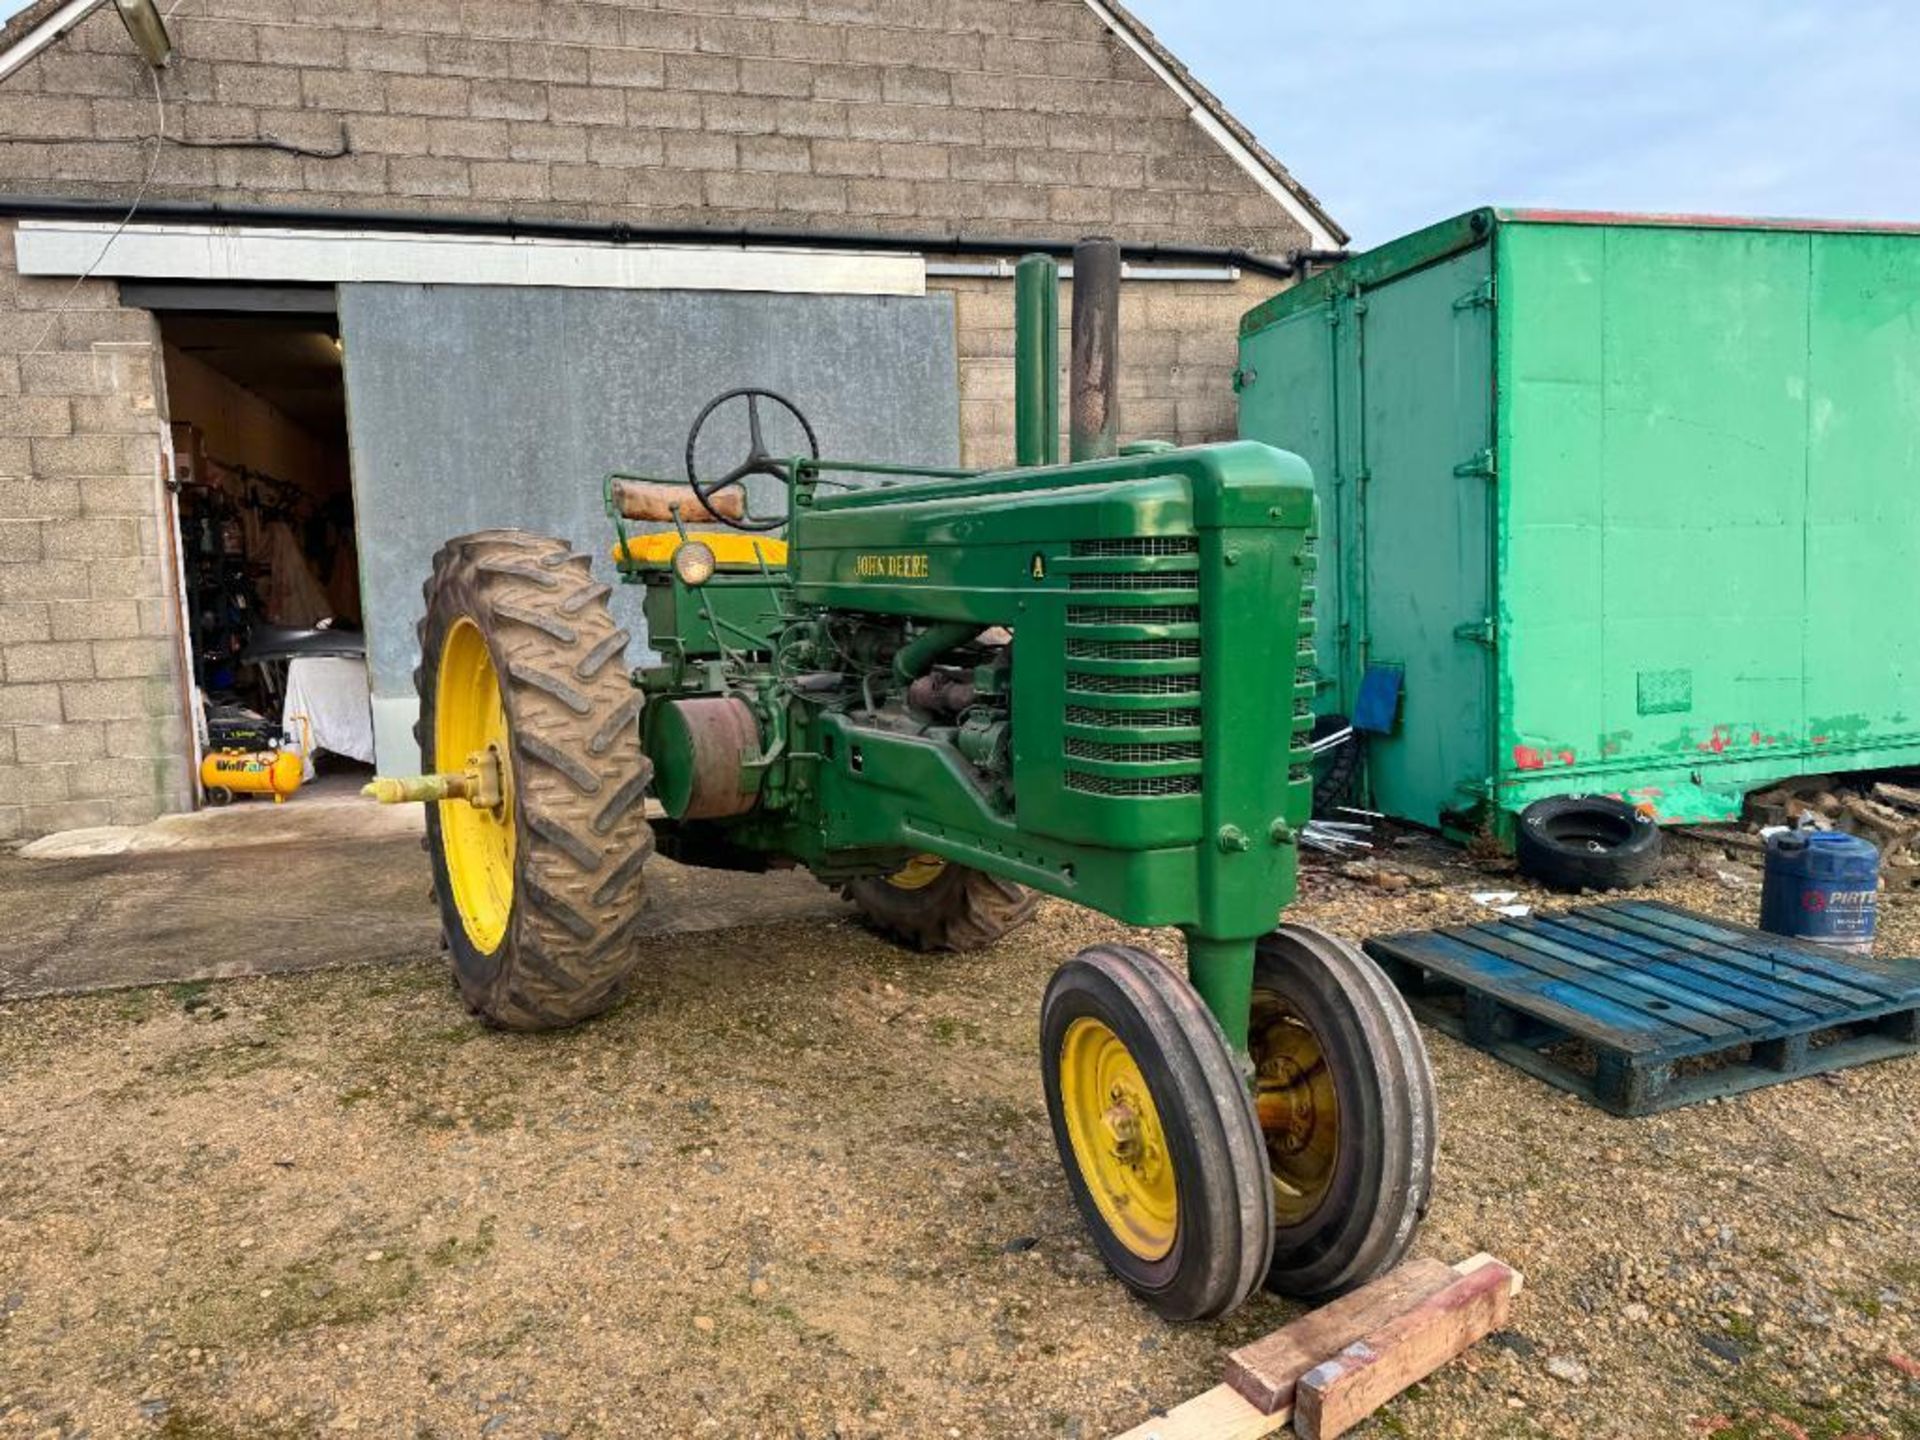 1948 John Deere Model A row crop tractor with side belt pulley, rear PTO and drawbar and twin front - Image 4 of 15